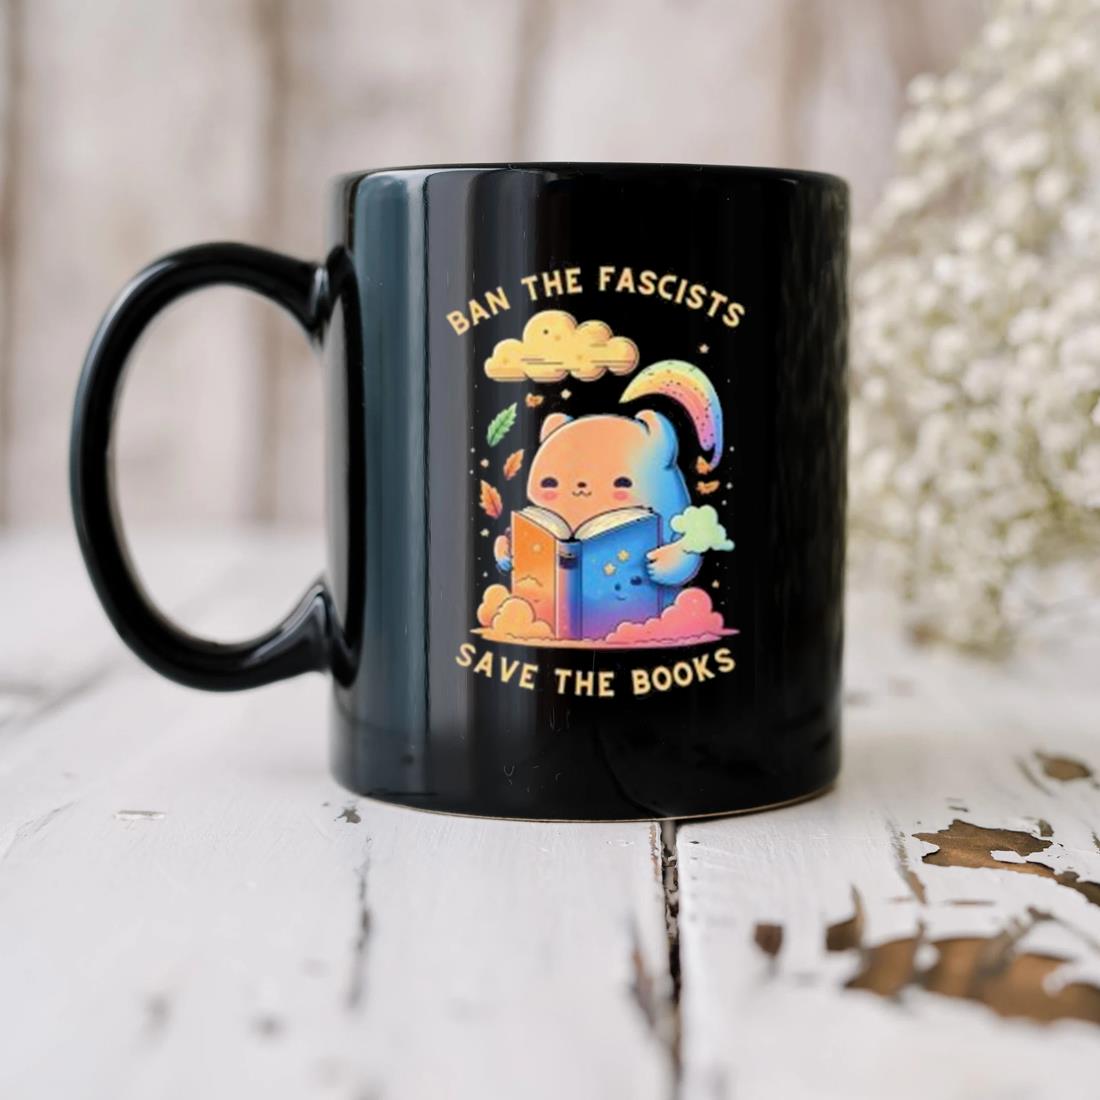 Ban The Fascists Save The Books Stand Against Fascism Vintage Mug